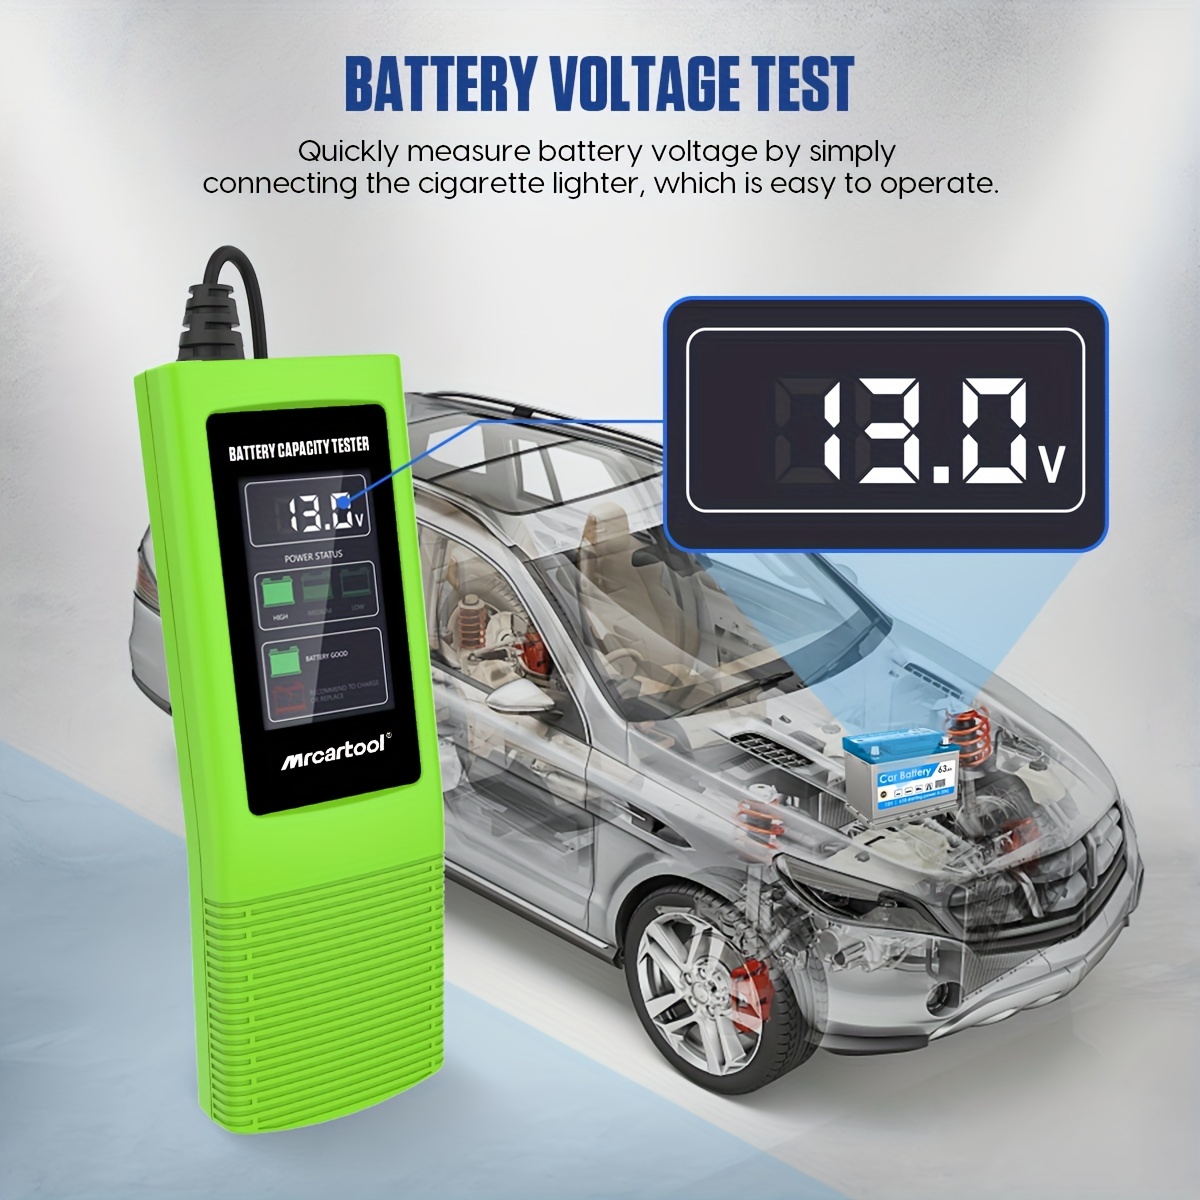 How To Test A Car Battery's Voltage